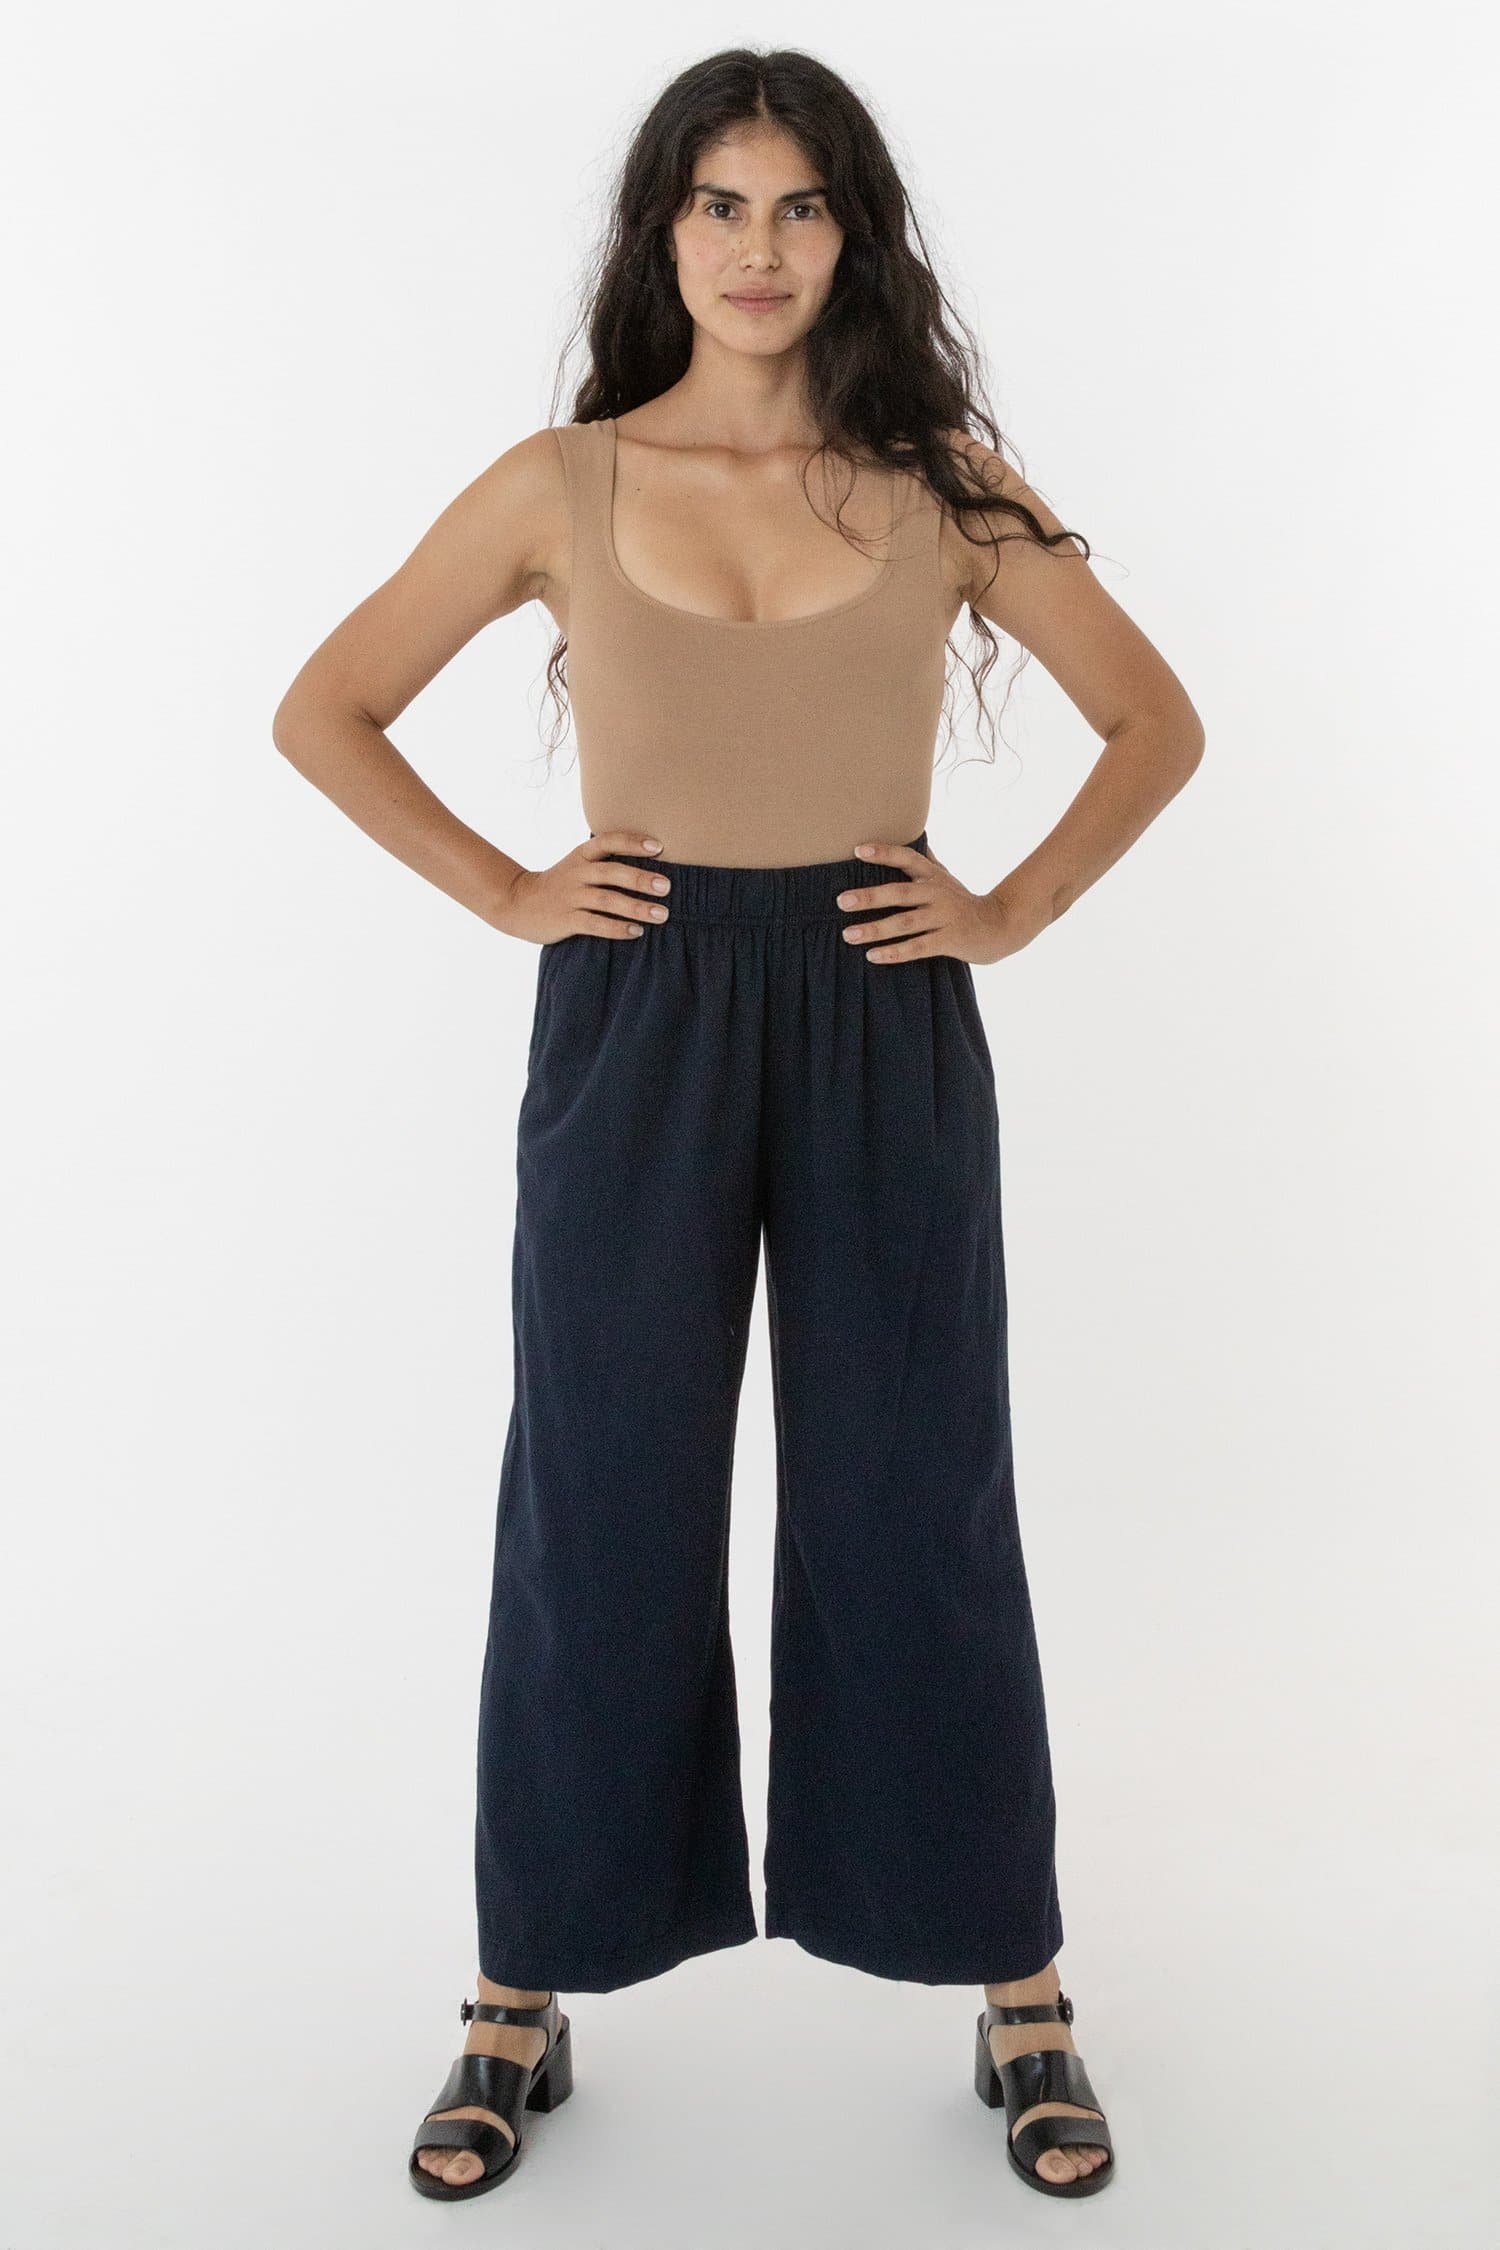 Women’s Daily Twill Crop Pant made with Organic Cotton | Pact